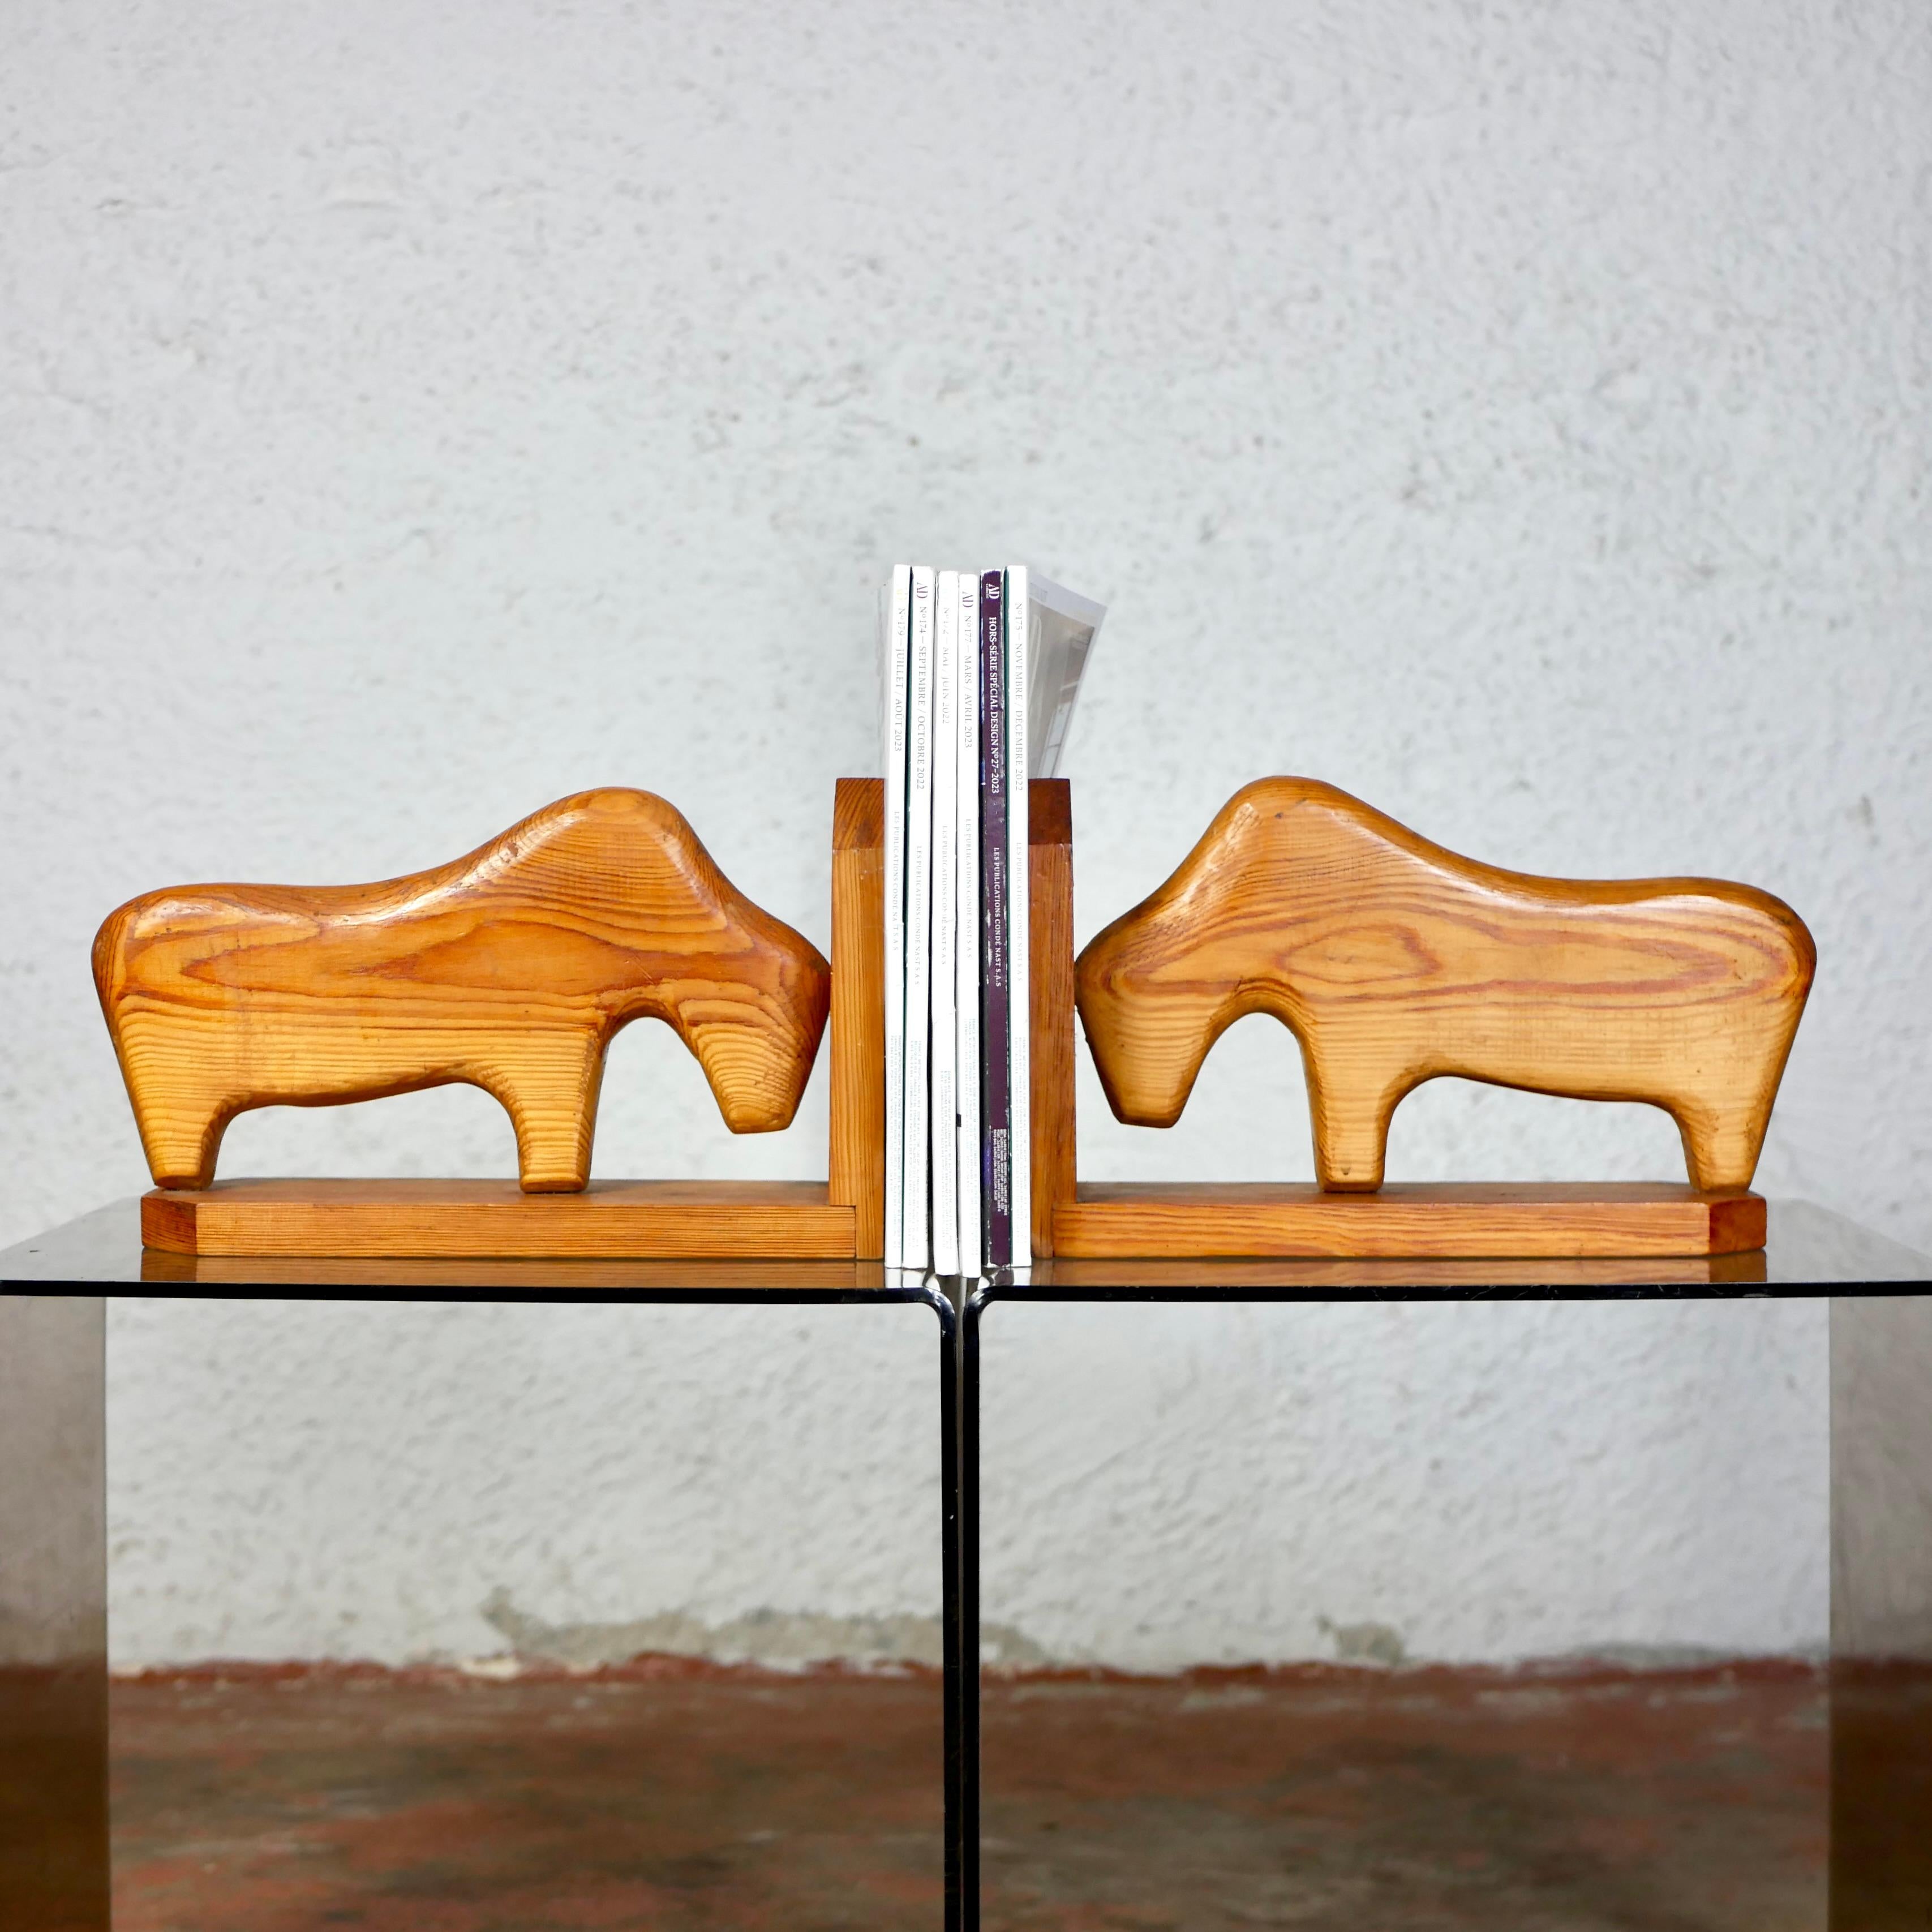 Nice pinewood bookends handmade in the 1980s, from the Netherlands, representing two yaks in a brutalist, almost naïve style.
Overall good condition.
Carved and signed 